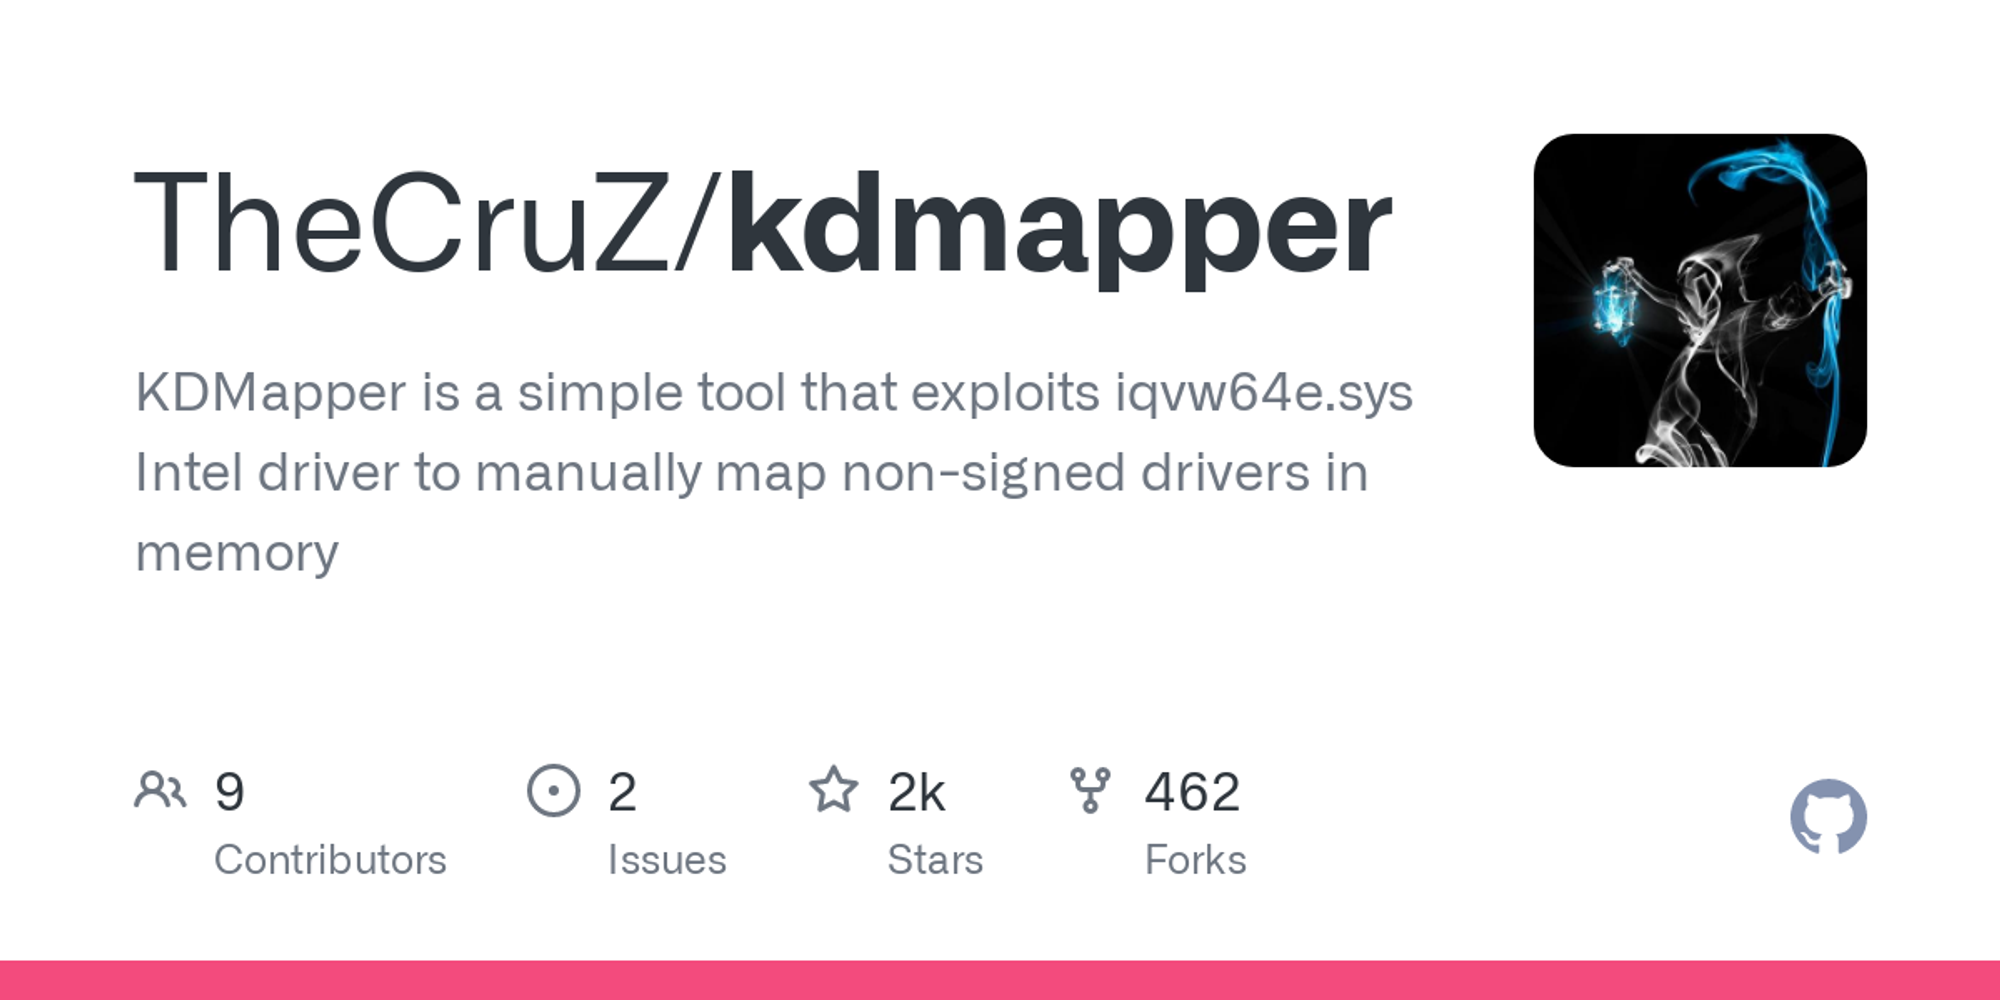 GitHub - TheCruZ/kdmapper: KDMapper is a simple tool that exploits iqvw64e.sys Intel driver to manually map non-signed drivers in memory